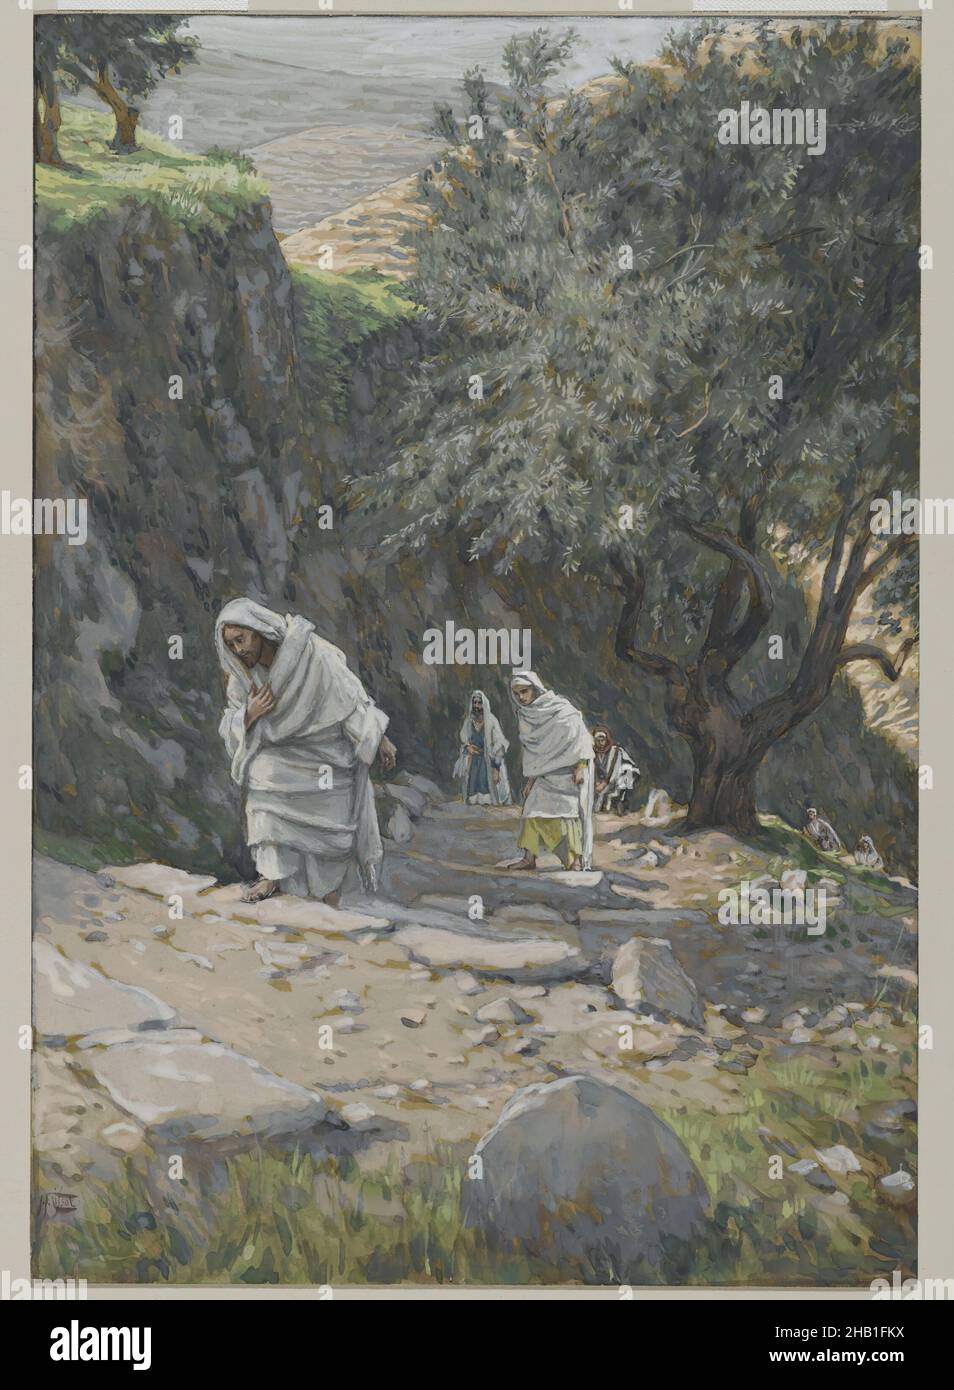 He Went on His Way to Ephraim, Il s'en alla à Ephrem, The Life of Our Lord Jesus Christ, La Vie de Notre-Seigneur Jésus-Christ, James Tissot, French, 1836-1902, Opaque watercolor over graphite on gray wove paper, France, 1886-1896, Image: 8 3/4 x 6 1/16 in., 22.2 x 15.4 cm, Bible, Biblical, Catholicism, Christ, Christianity, figures, French, Jesus, John 11:54, New Testament, people, Religion, Religious, trees Stock Photo